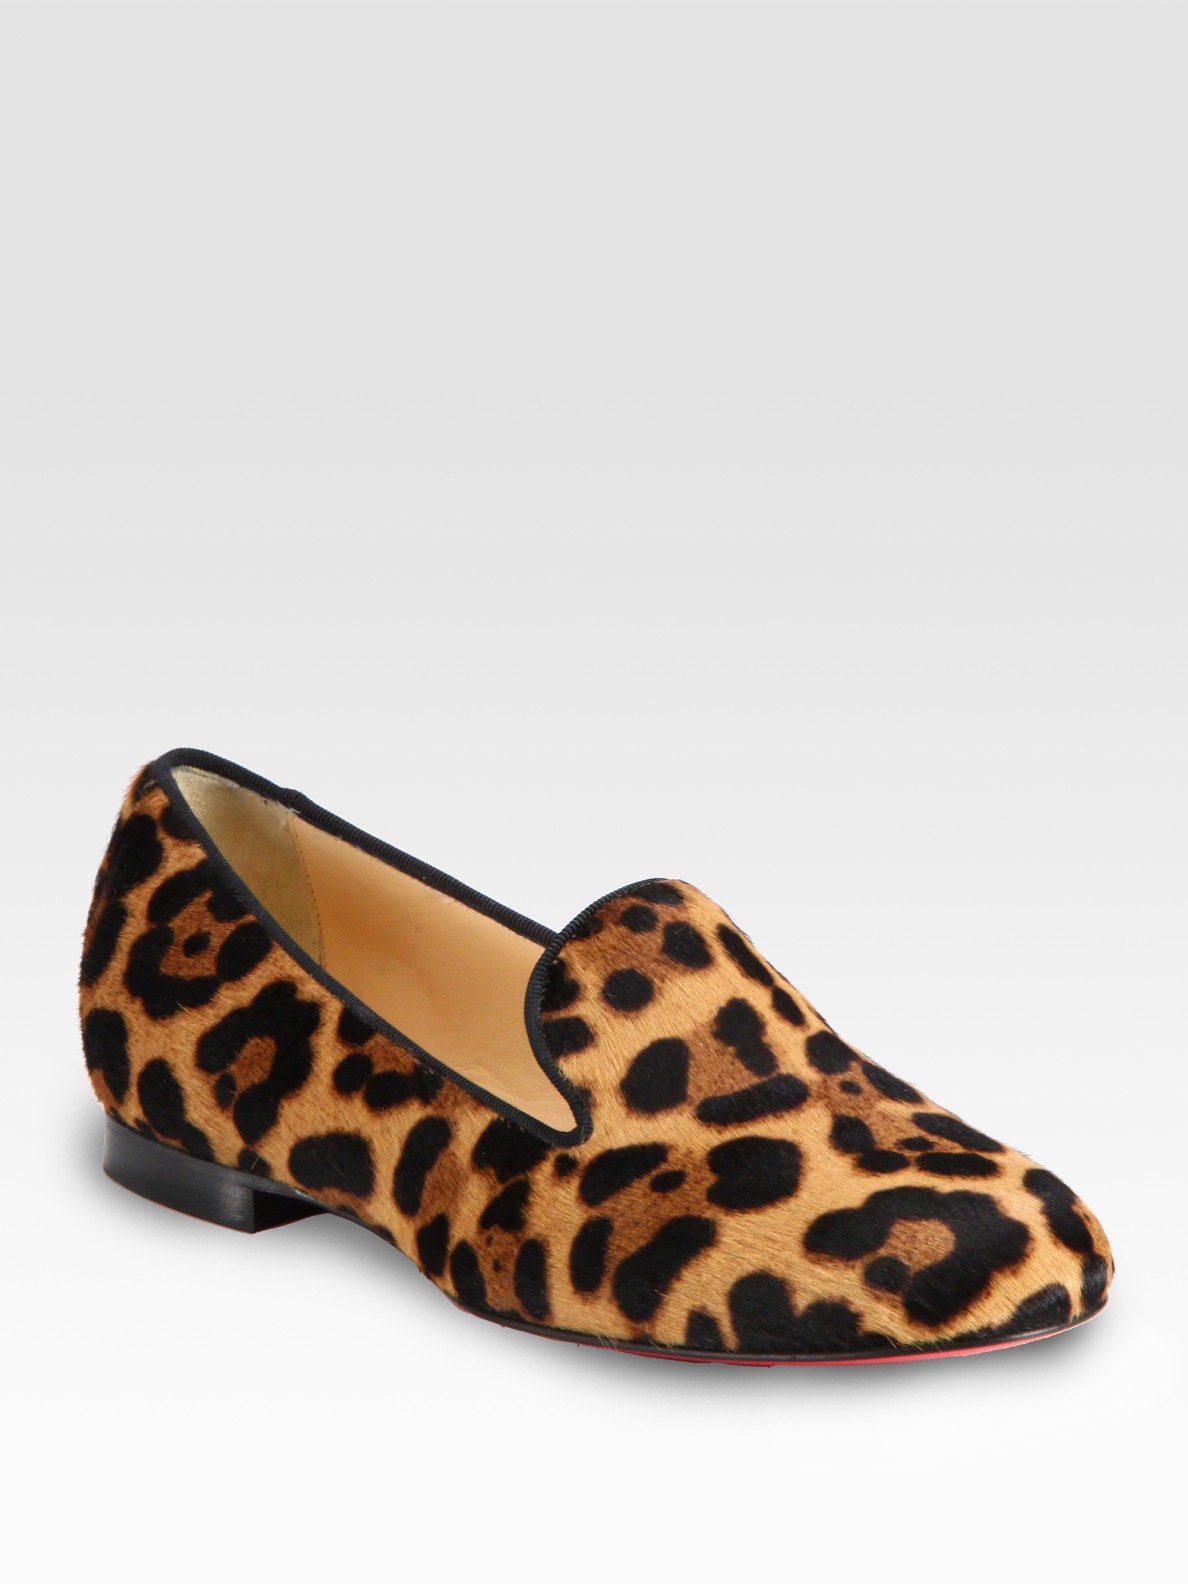 Christian louboutin Leopardprint Pony Hair Loafers in Animal ...